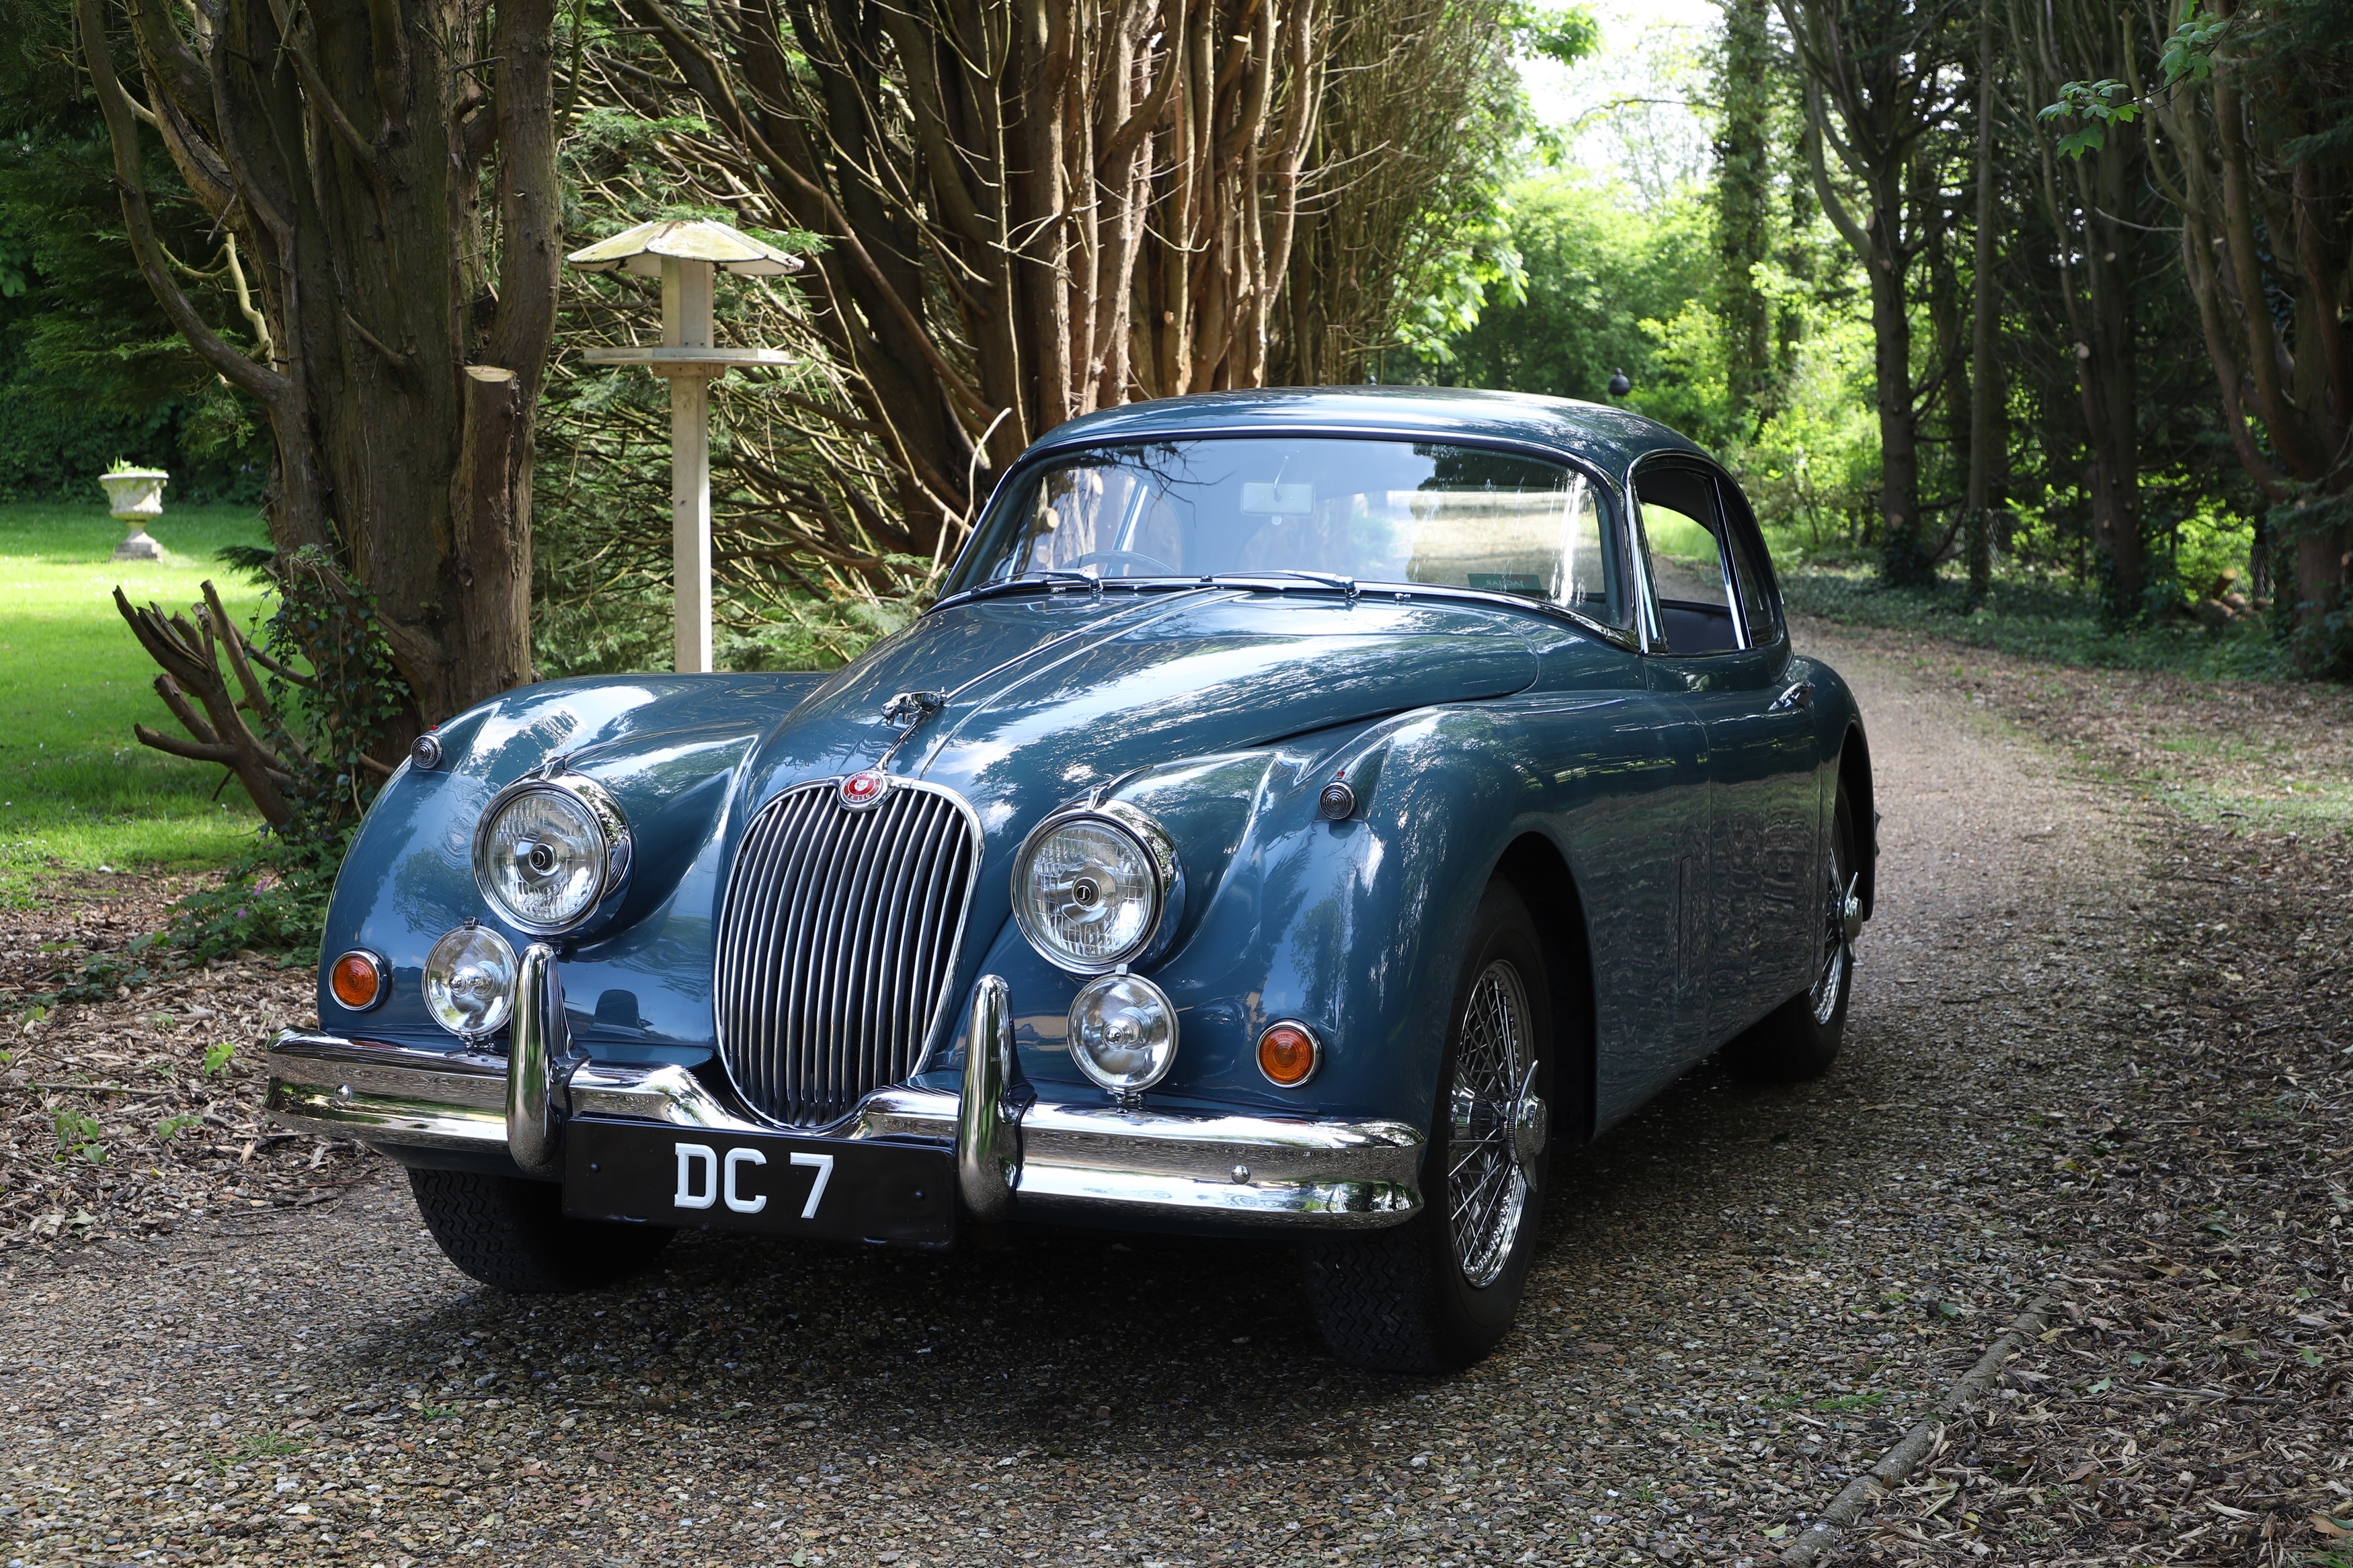 1958 Jaguar XK150 SE Fixed Head Coupé - Formerly the Property of Donald Campbell CBE (£150,000-170,000)